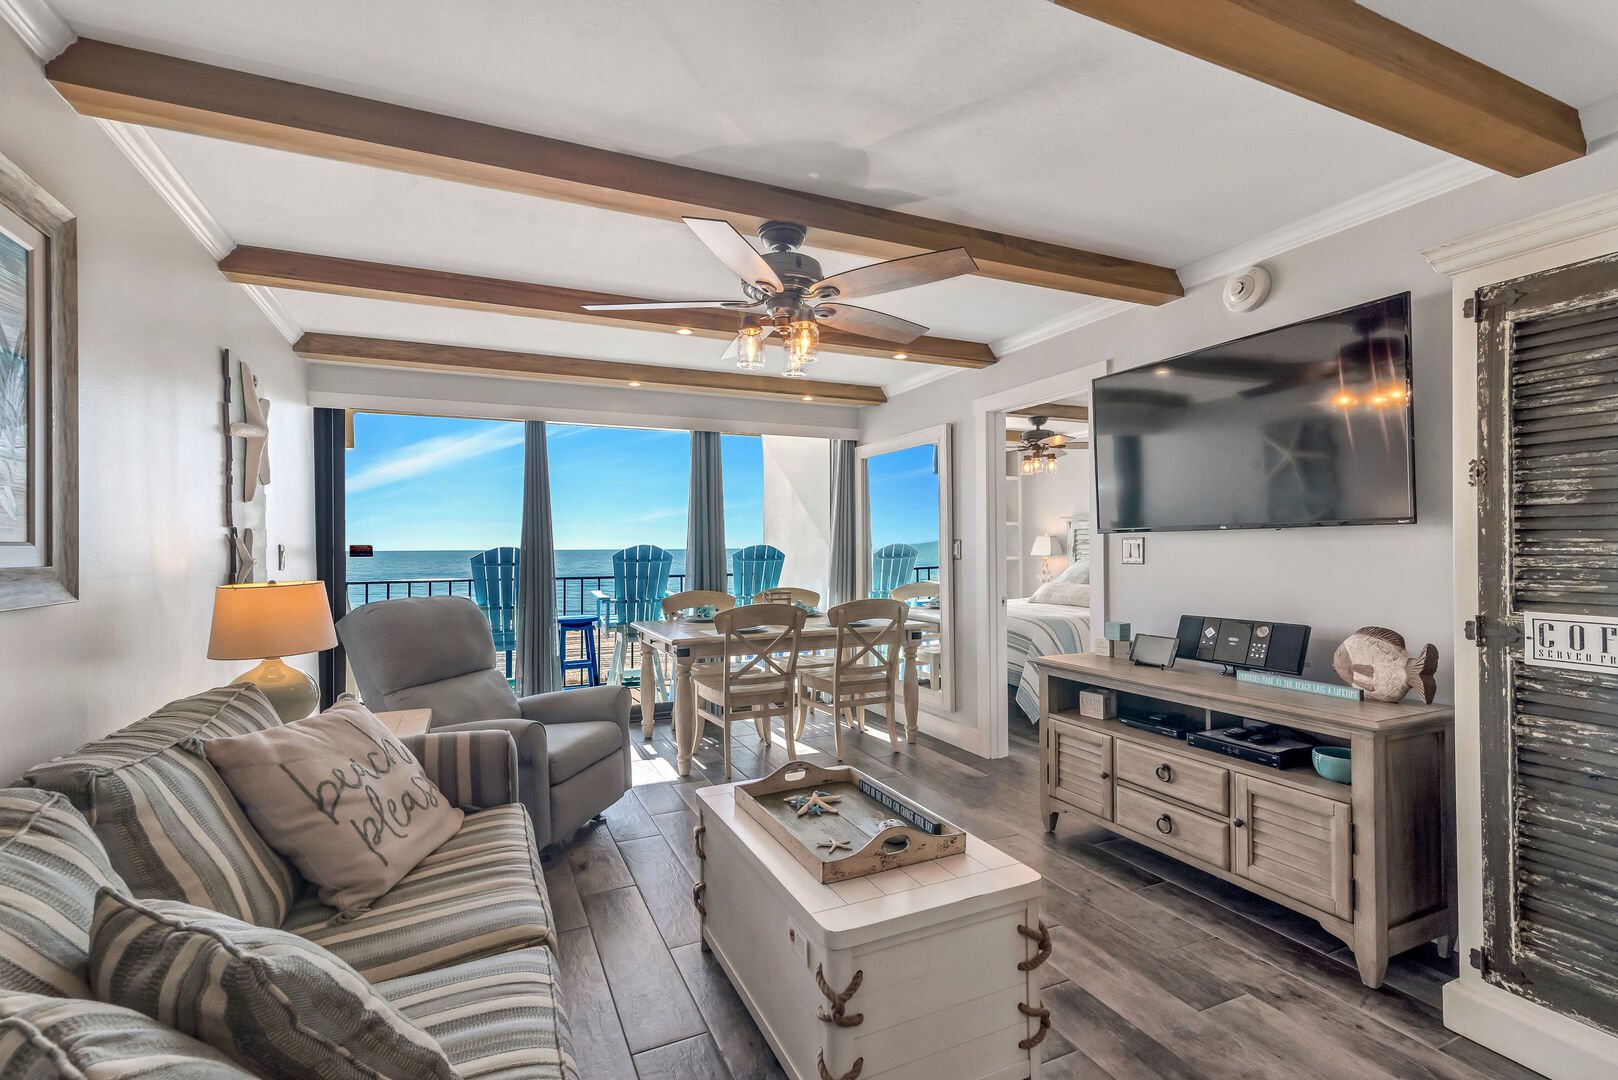 Open Plan Living Area with Comfortable Queen Size Sleeper Sofa with Sweeping Floor to Ceiling Views of the Gulf of Mexico